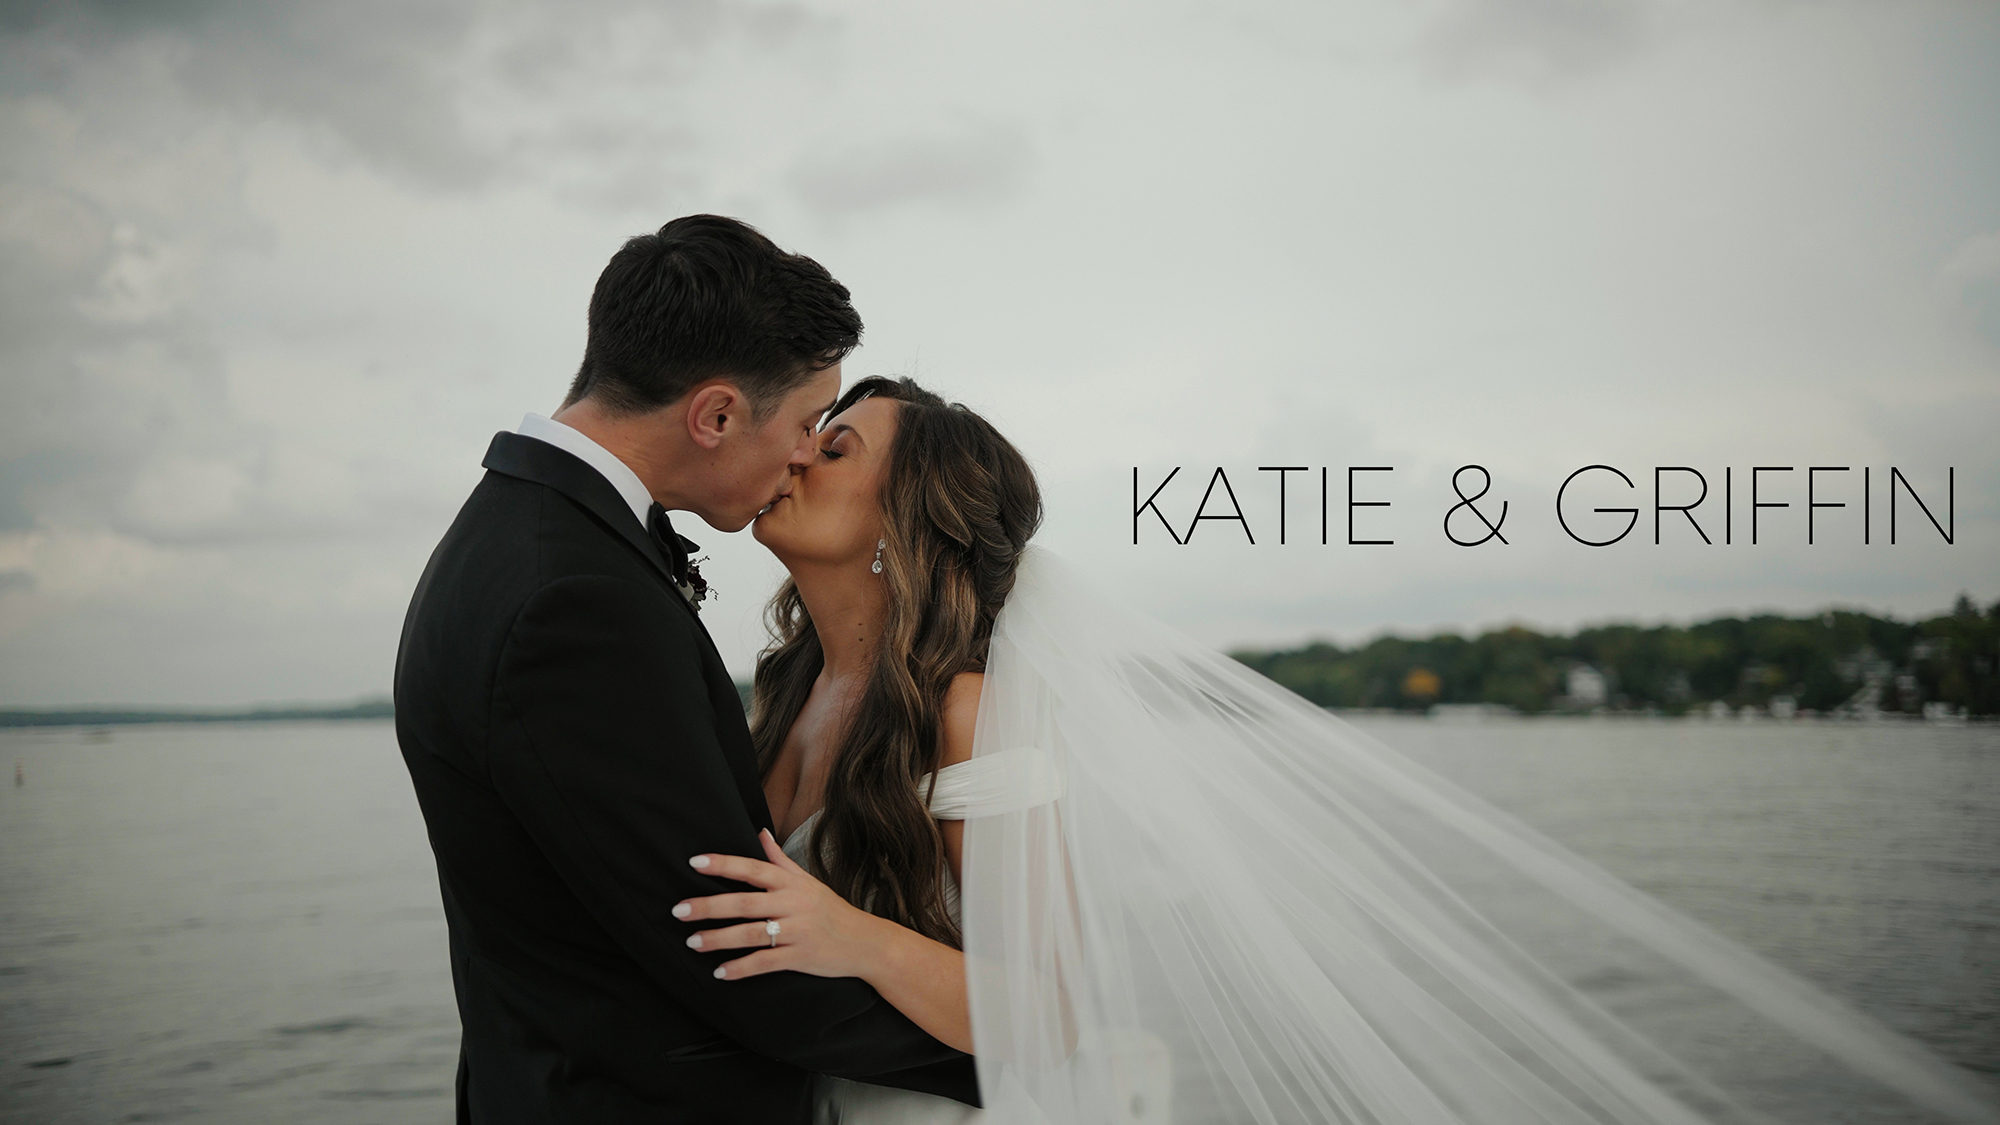 Watch Katie and Griffin's Trailer